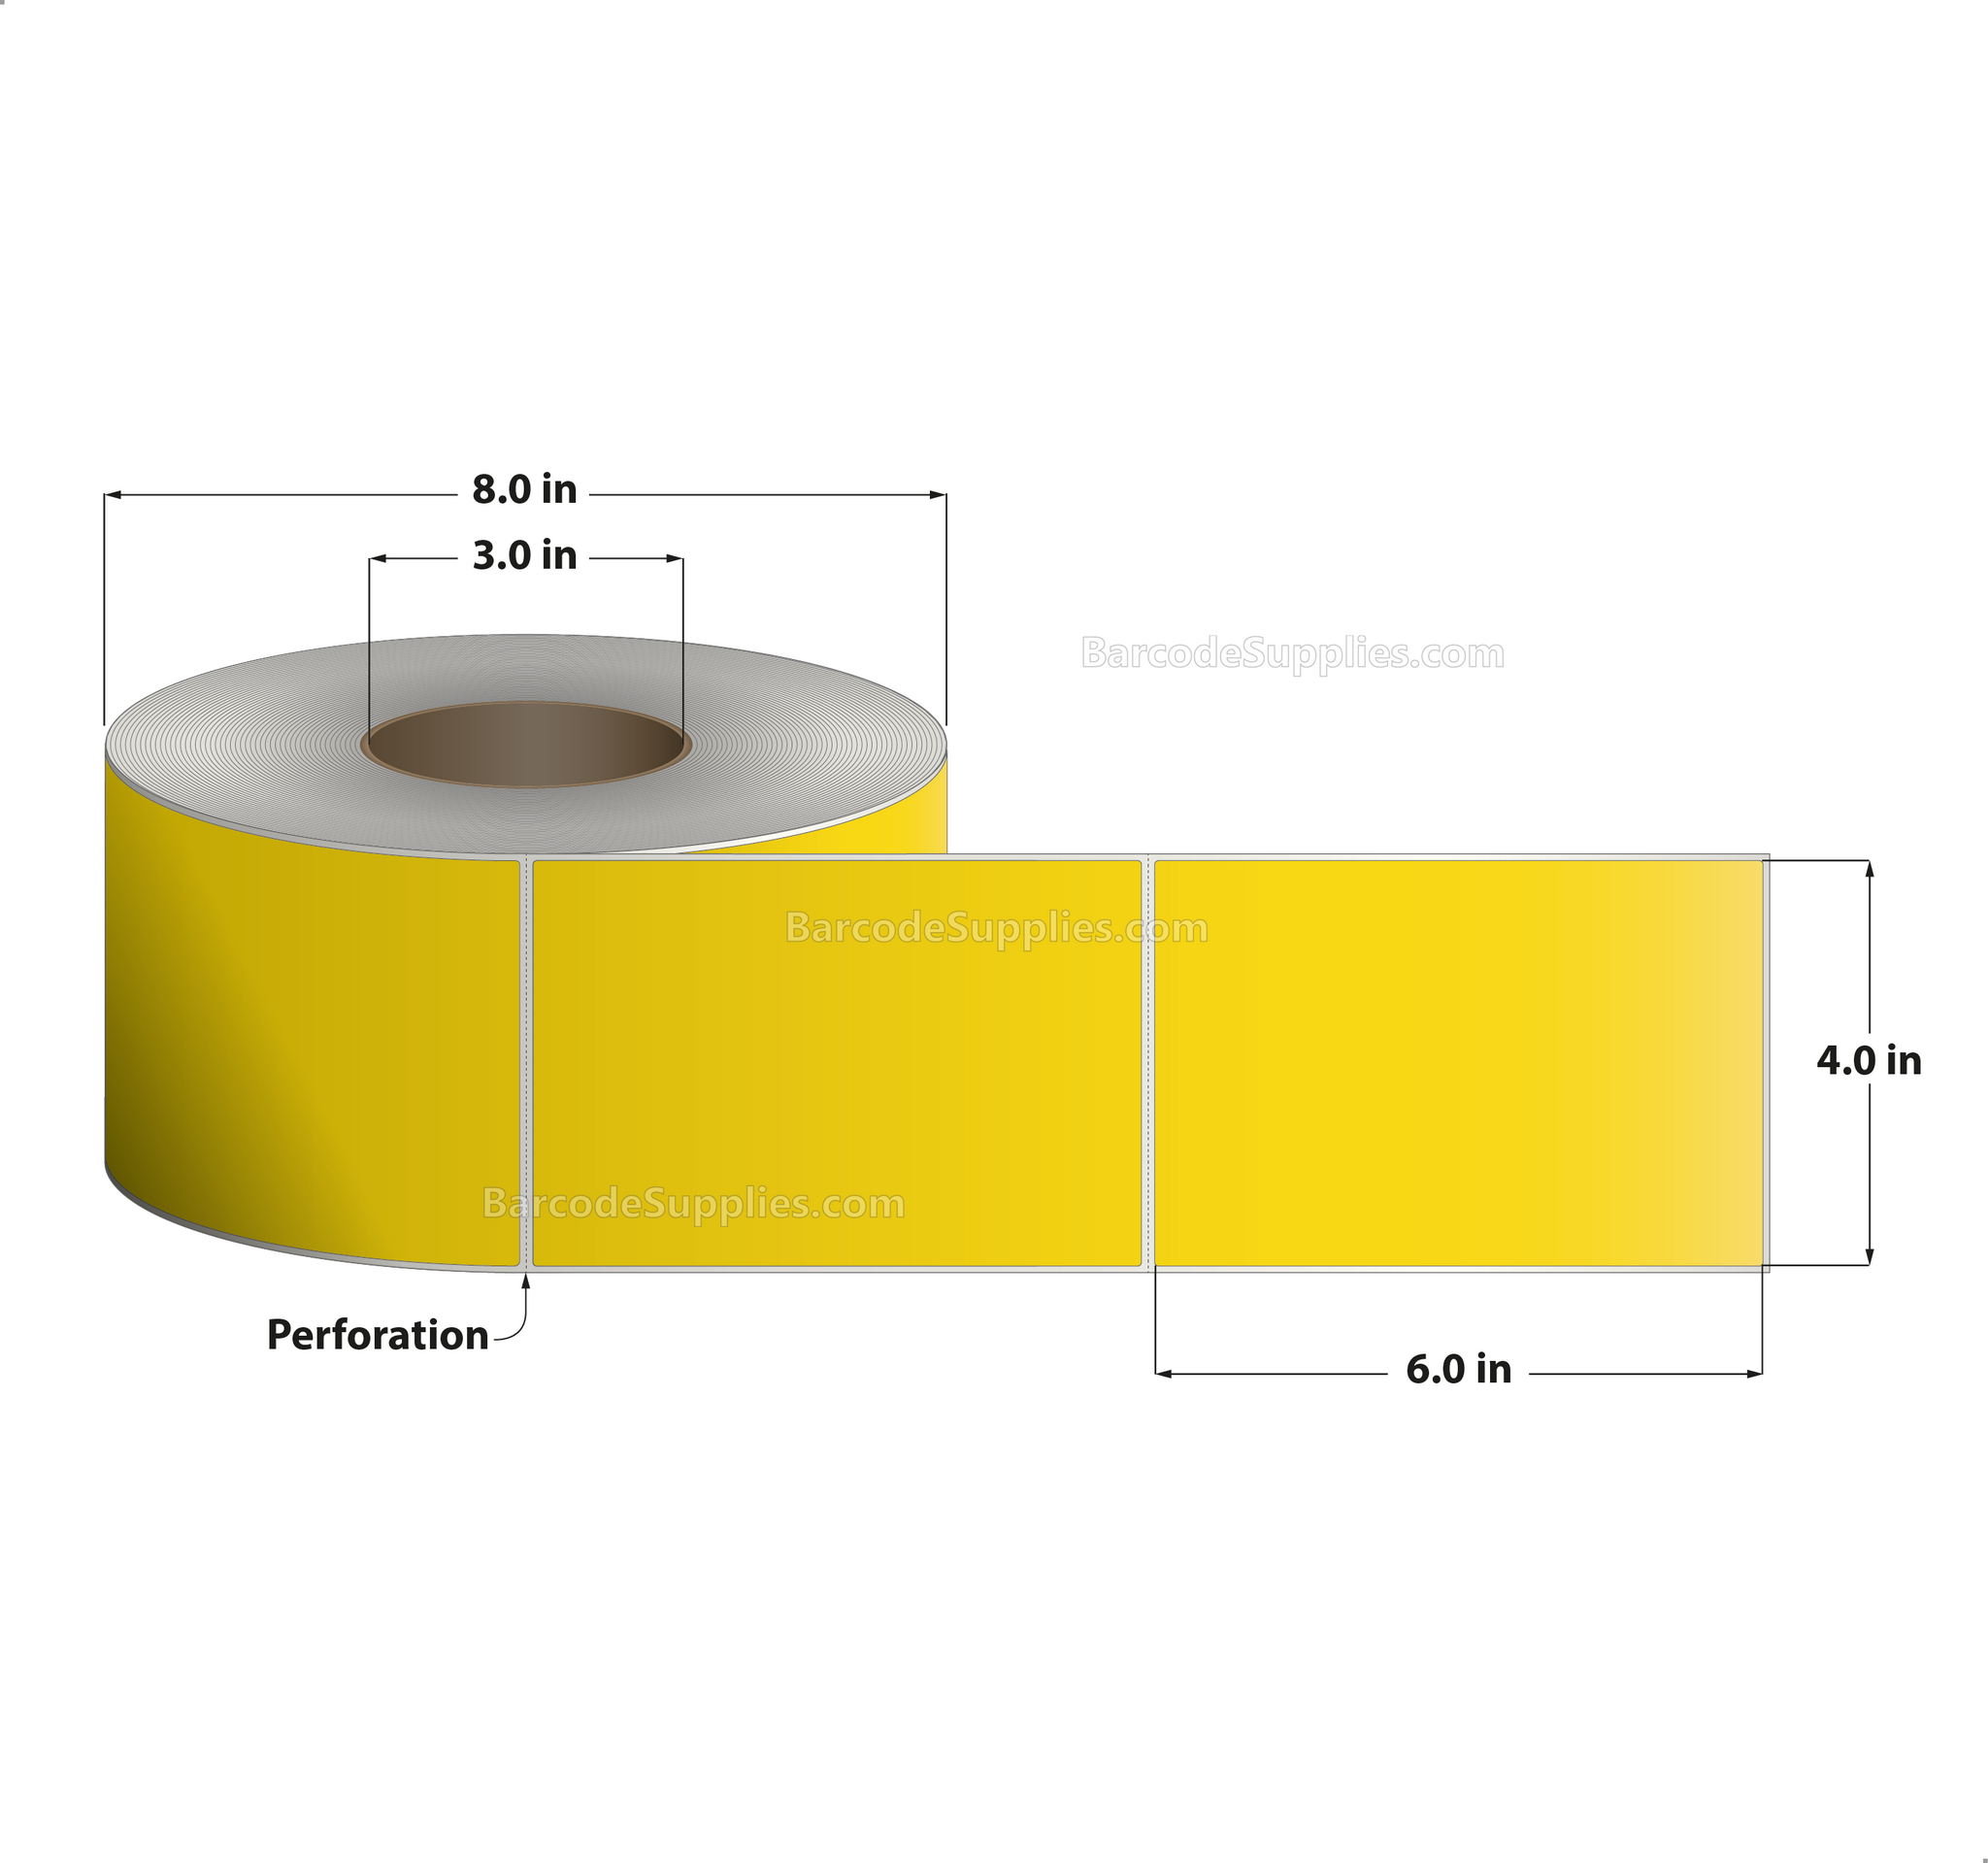 4 x 6 Thermal Transfer Pantone Yellow Labels With Permanent Acrylic Adhesive - Perforated - 1000 Labels Per Roll - Carton Of 4 Rolls - 4000 Labels Total - MPN: TH46-1PY